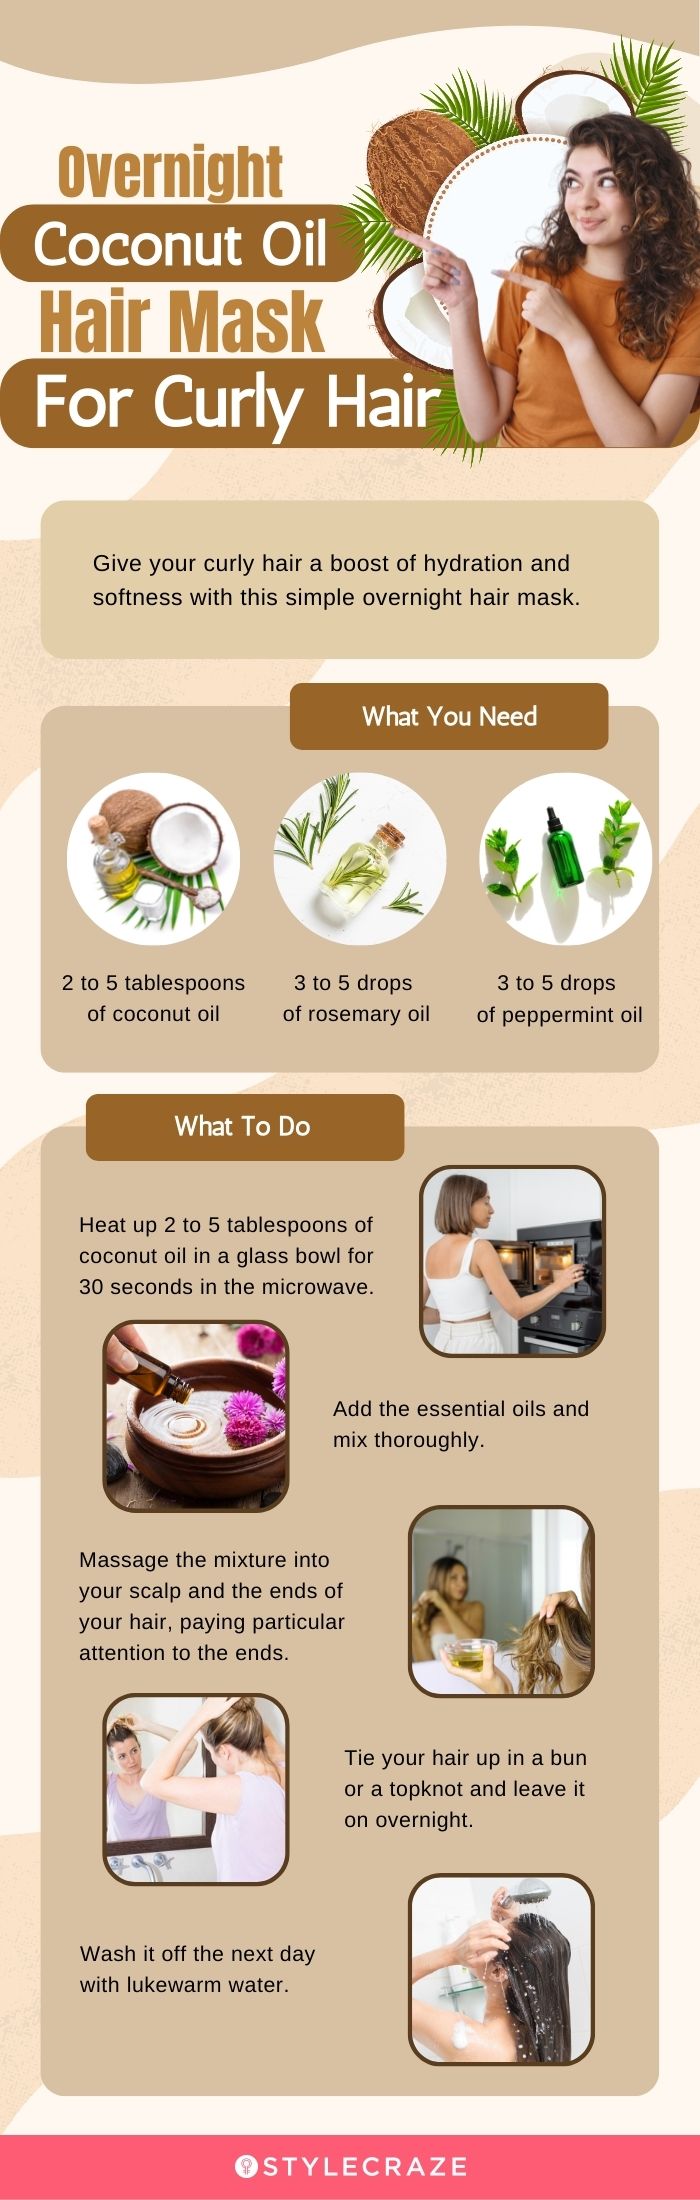 overnight coconut oil hair mask for curly hair (infographic)